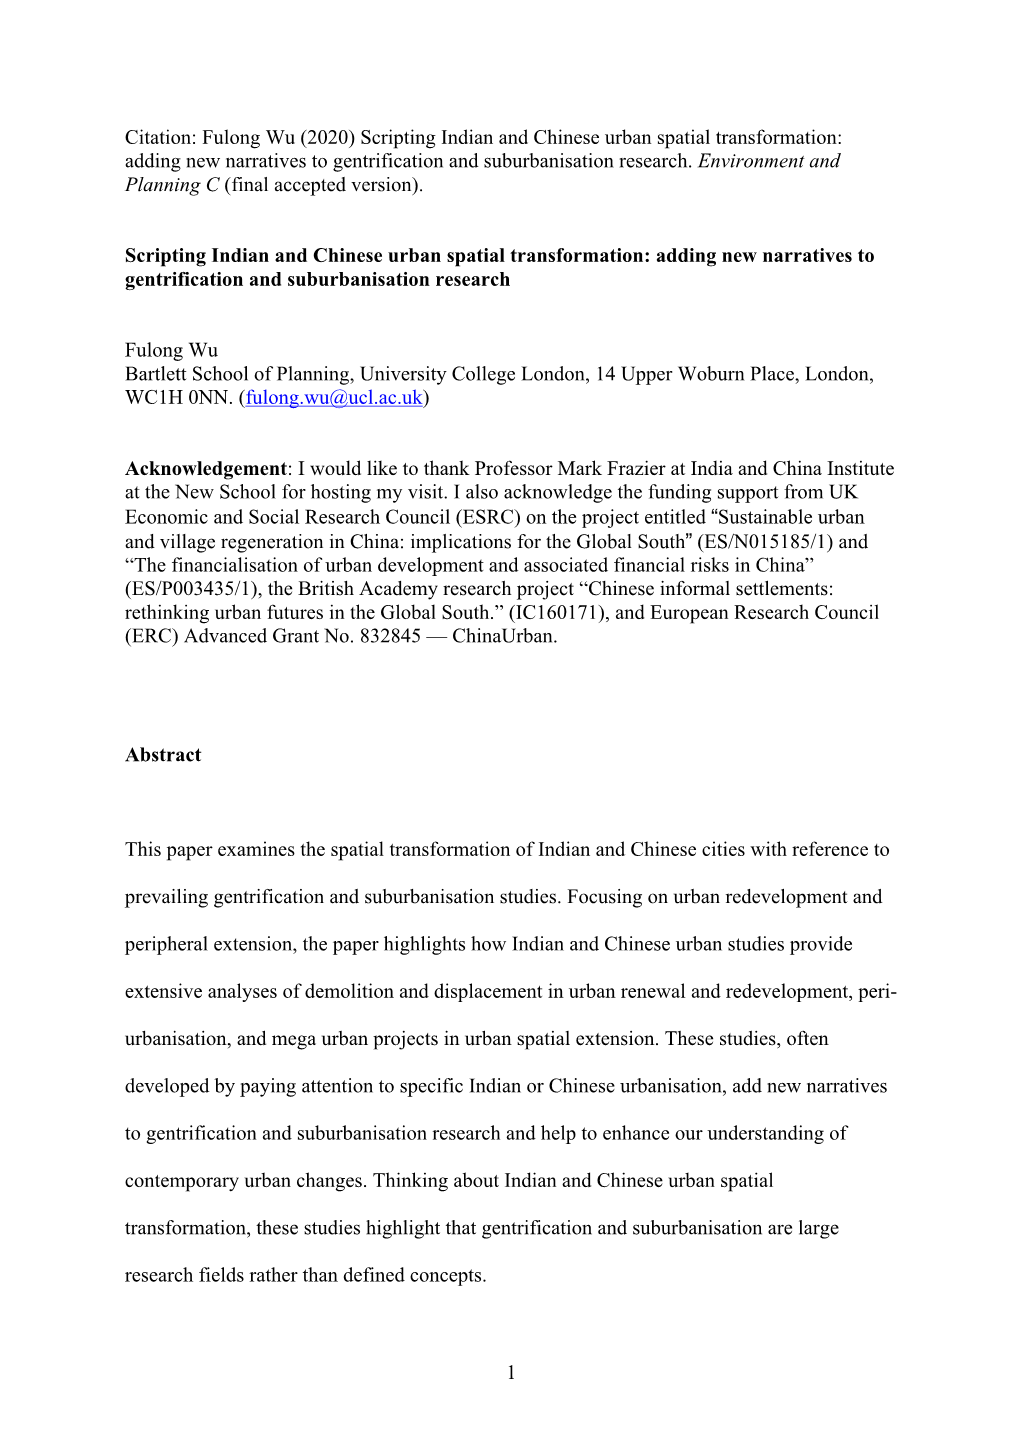 (2020) Scripting Indian and Chinese Urban Spatial Transformation: Adding New Narratives to Gentrification and Suburbanisation Research